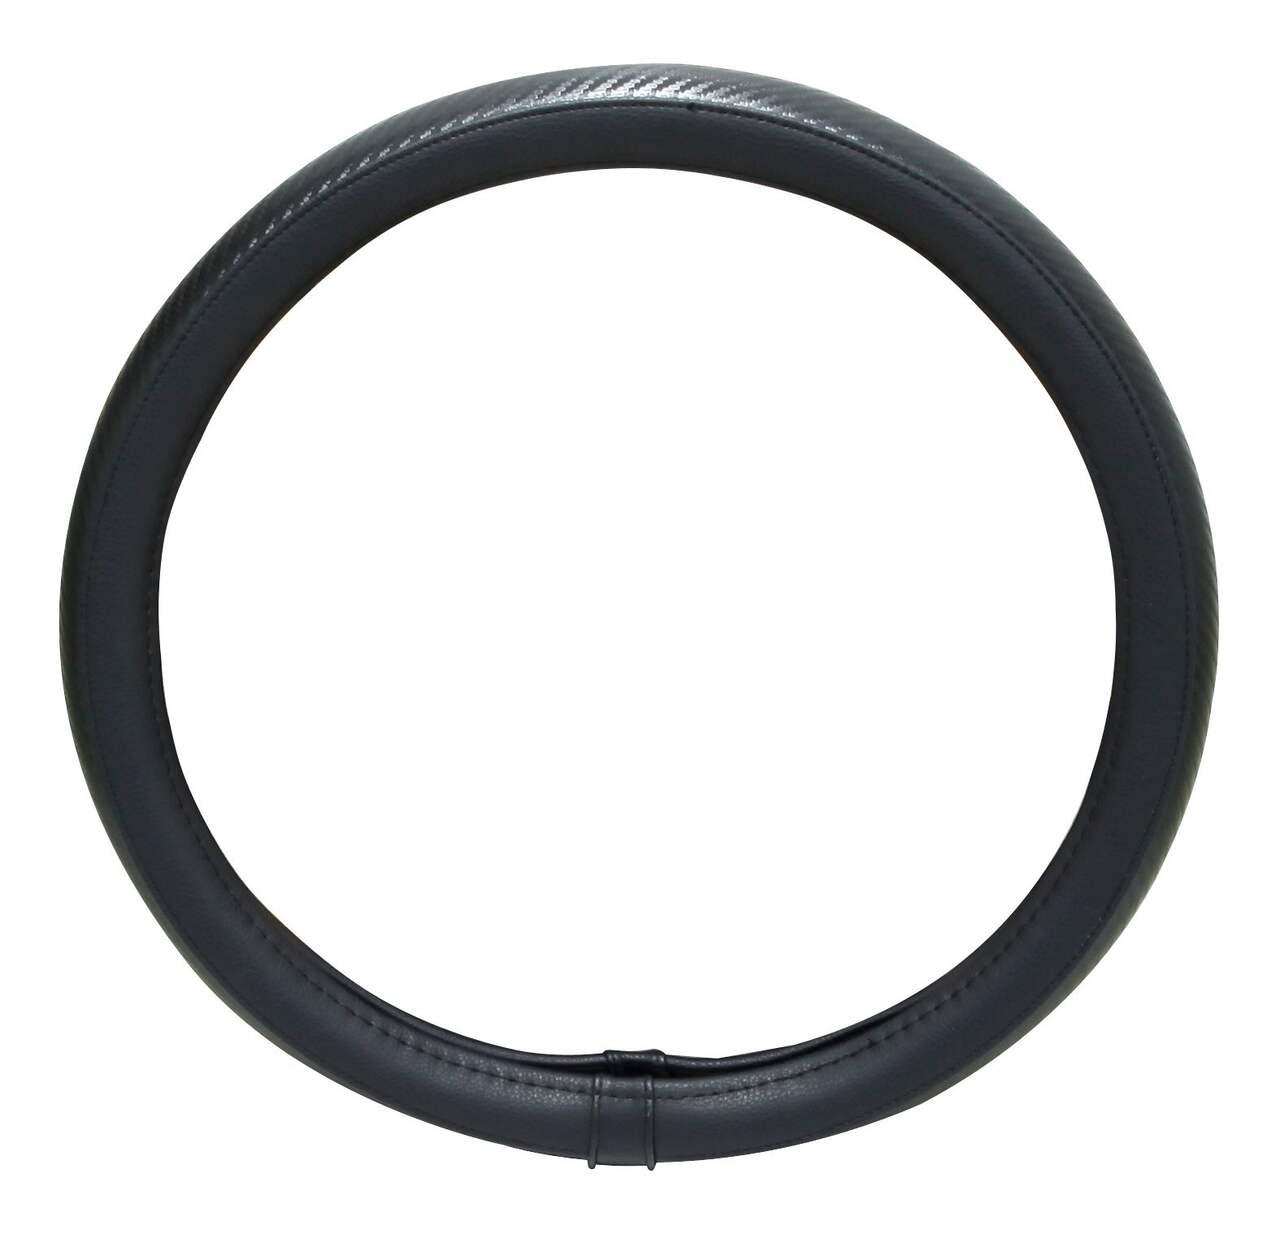 https://media-www.canadiantire.ca/product/automotive/car-care-accessories/auto-comfort/0324488/autotrends-carbon-fibre-steering-wheel-cover-f5c1ecb1-ae54-476c-a3e1-984ad2223c04-jpgrendition.jpg?imdensity=1&imwidth=640&impolicy=mZoom